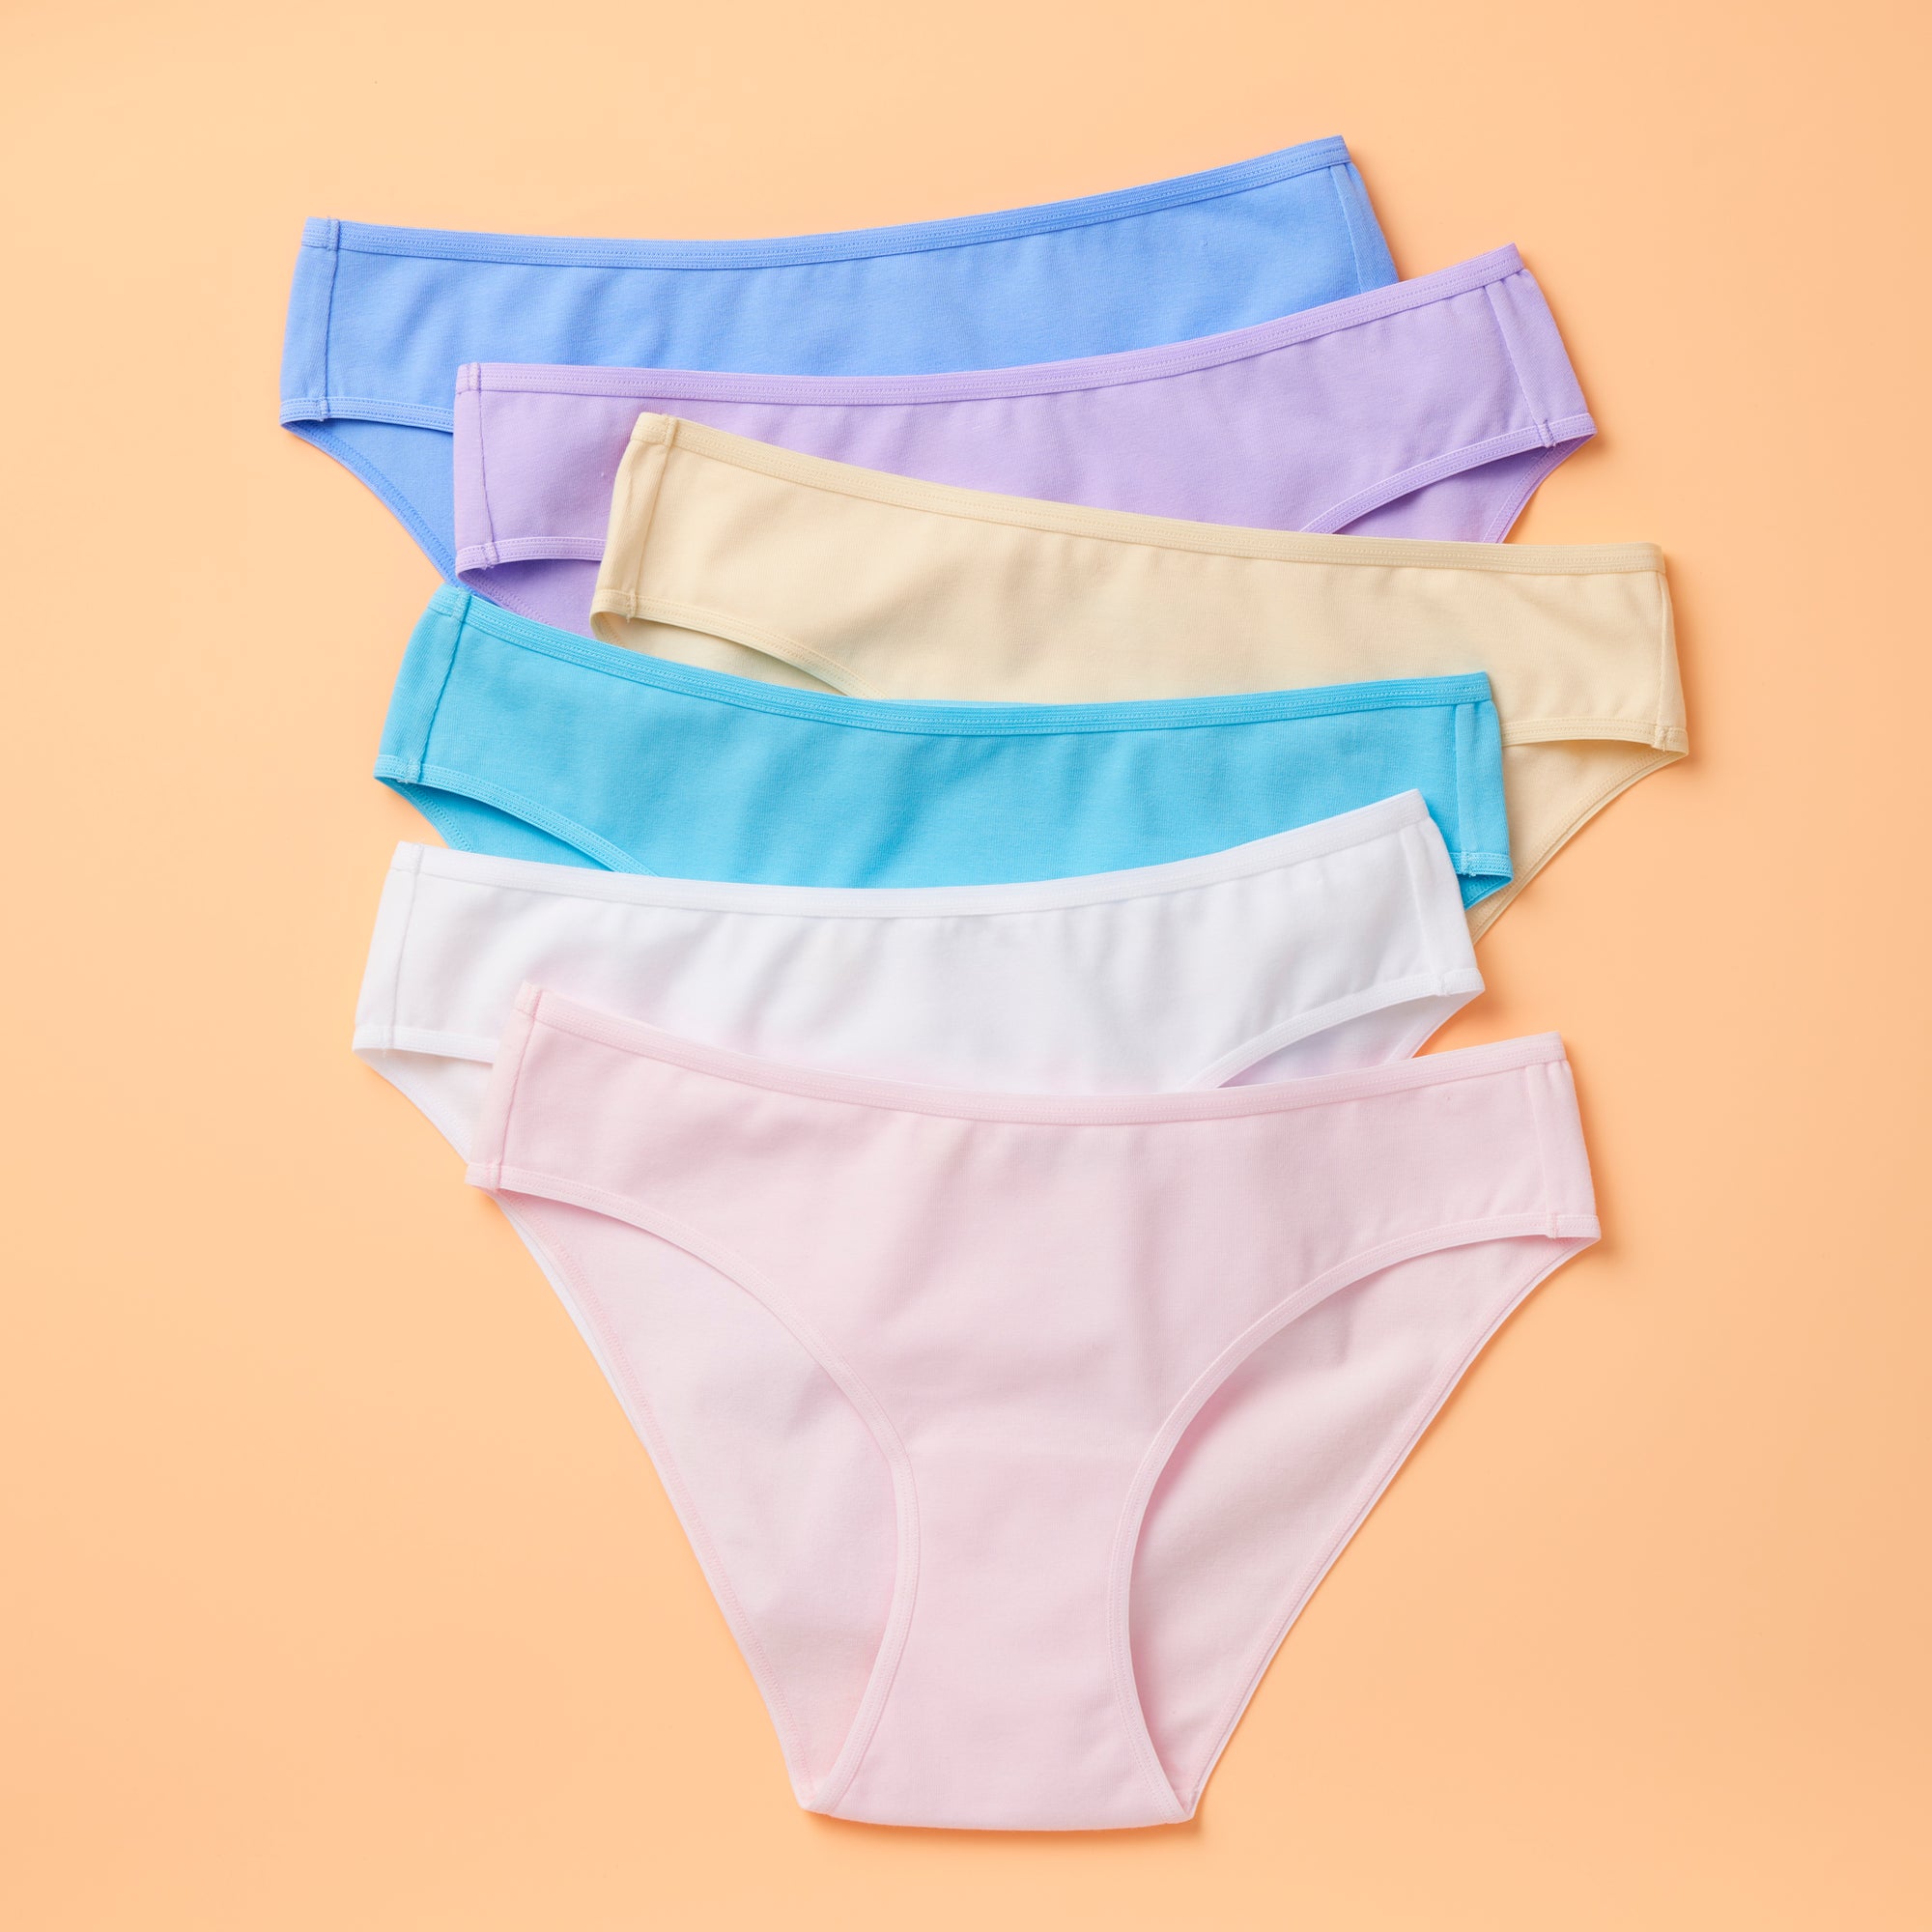 A3/ Carrie Amber Size XL Women's Soft Touch Cotton Thongs Panties